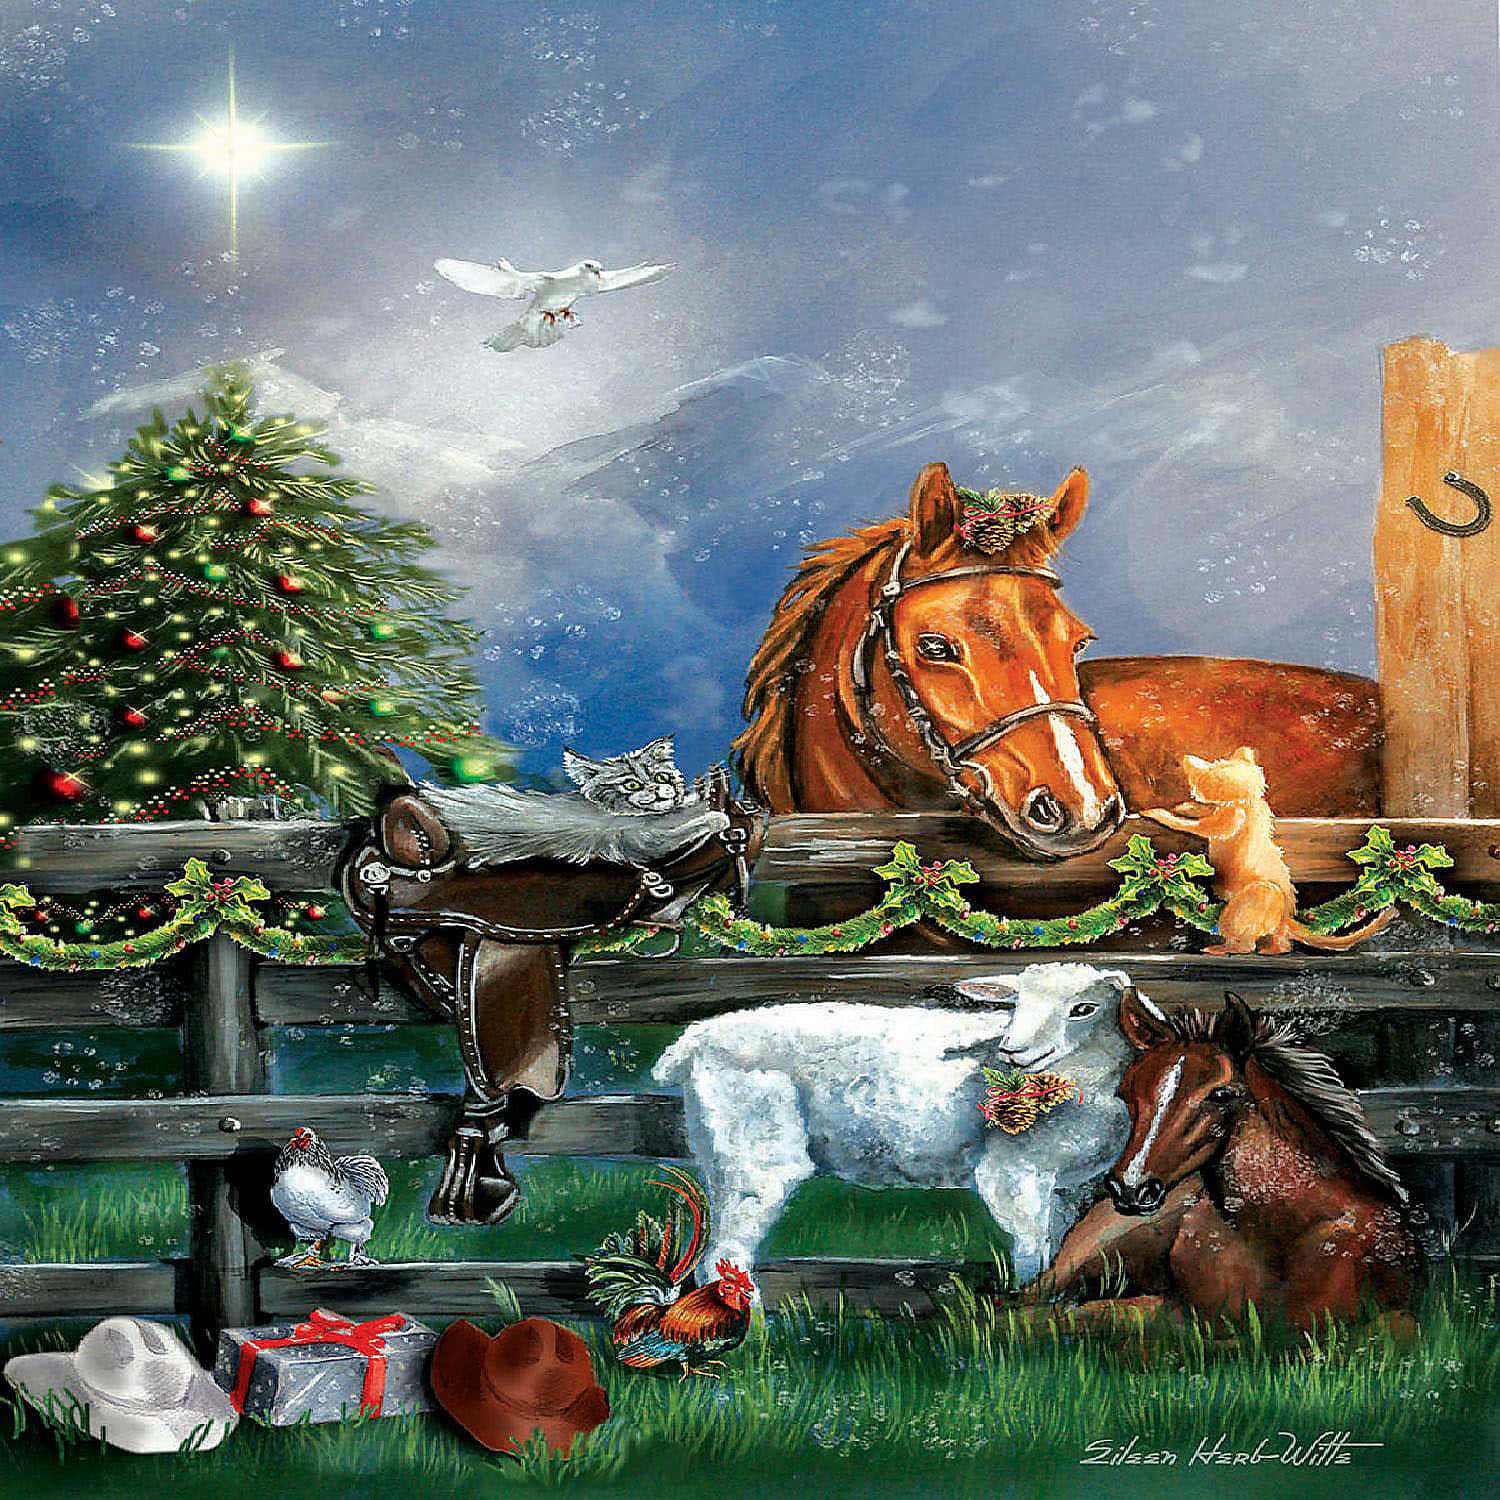 HD wallpaper white horse figurine and assortedcolor Christmas bauble lot   Wallpaper Flare